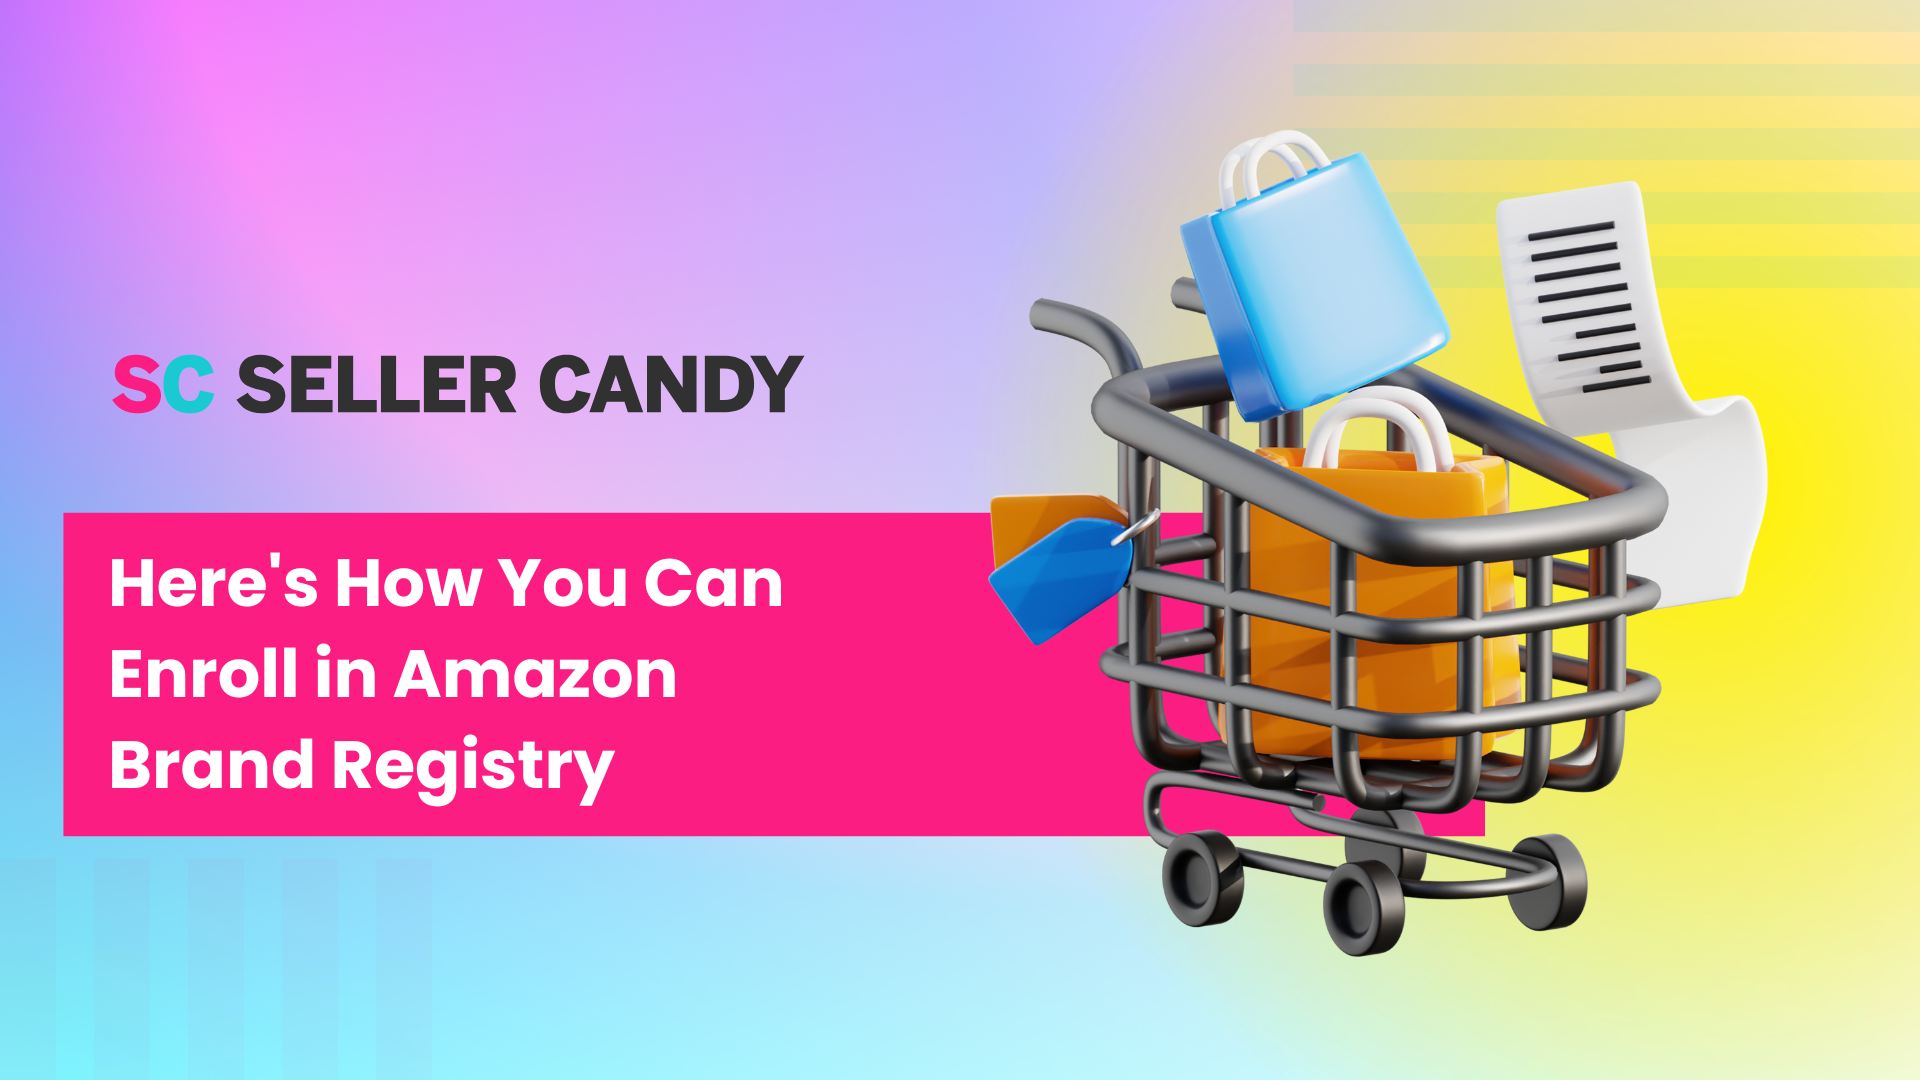 Heres How You Can Enroll in Amazon Brand Registry